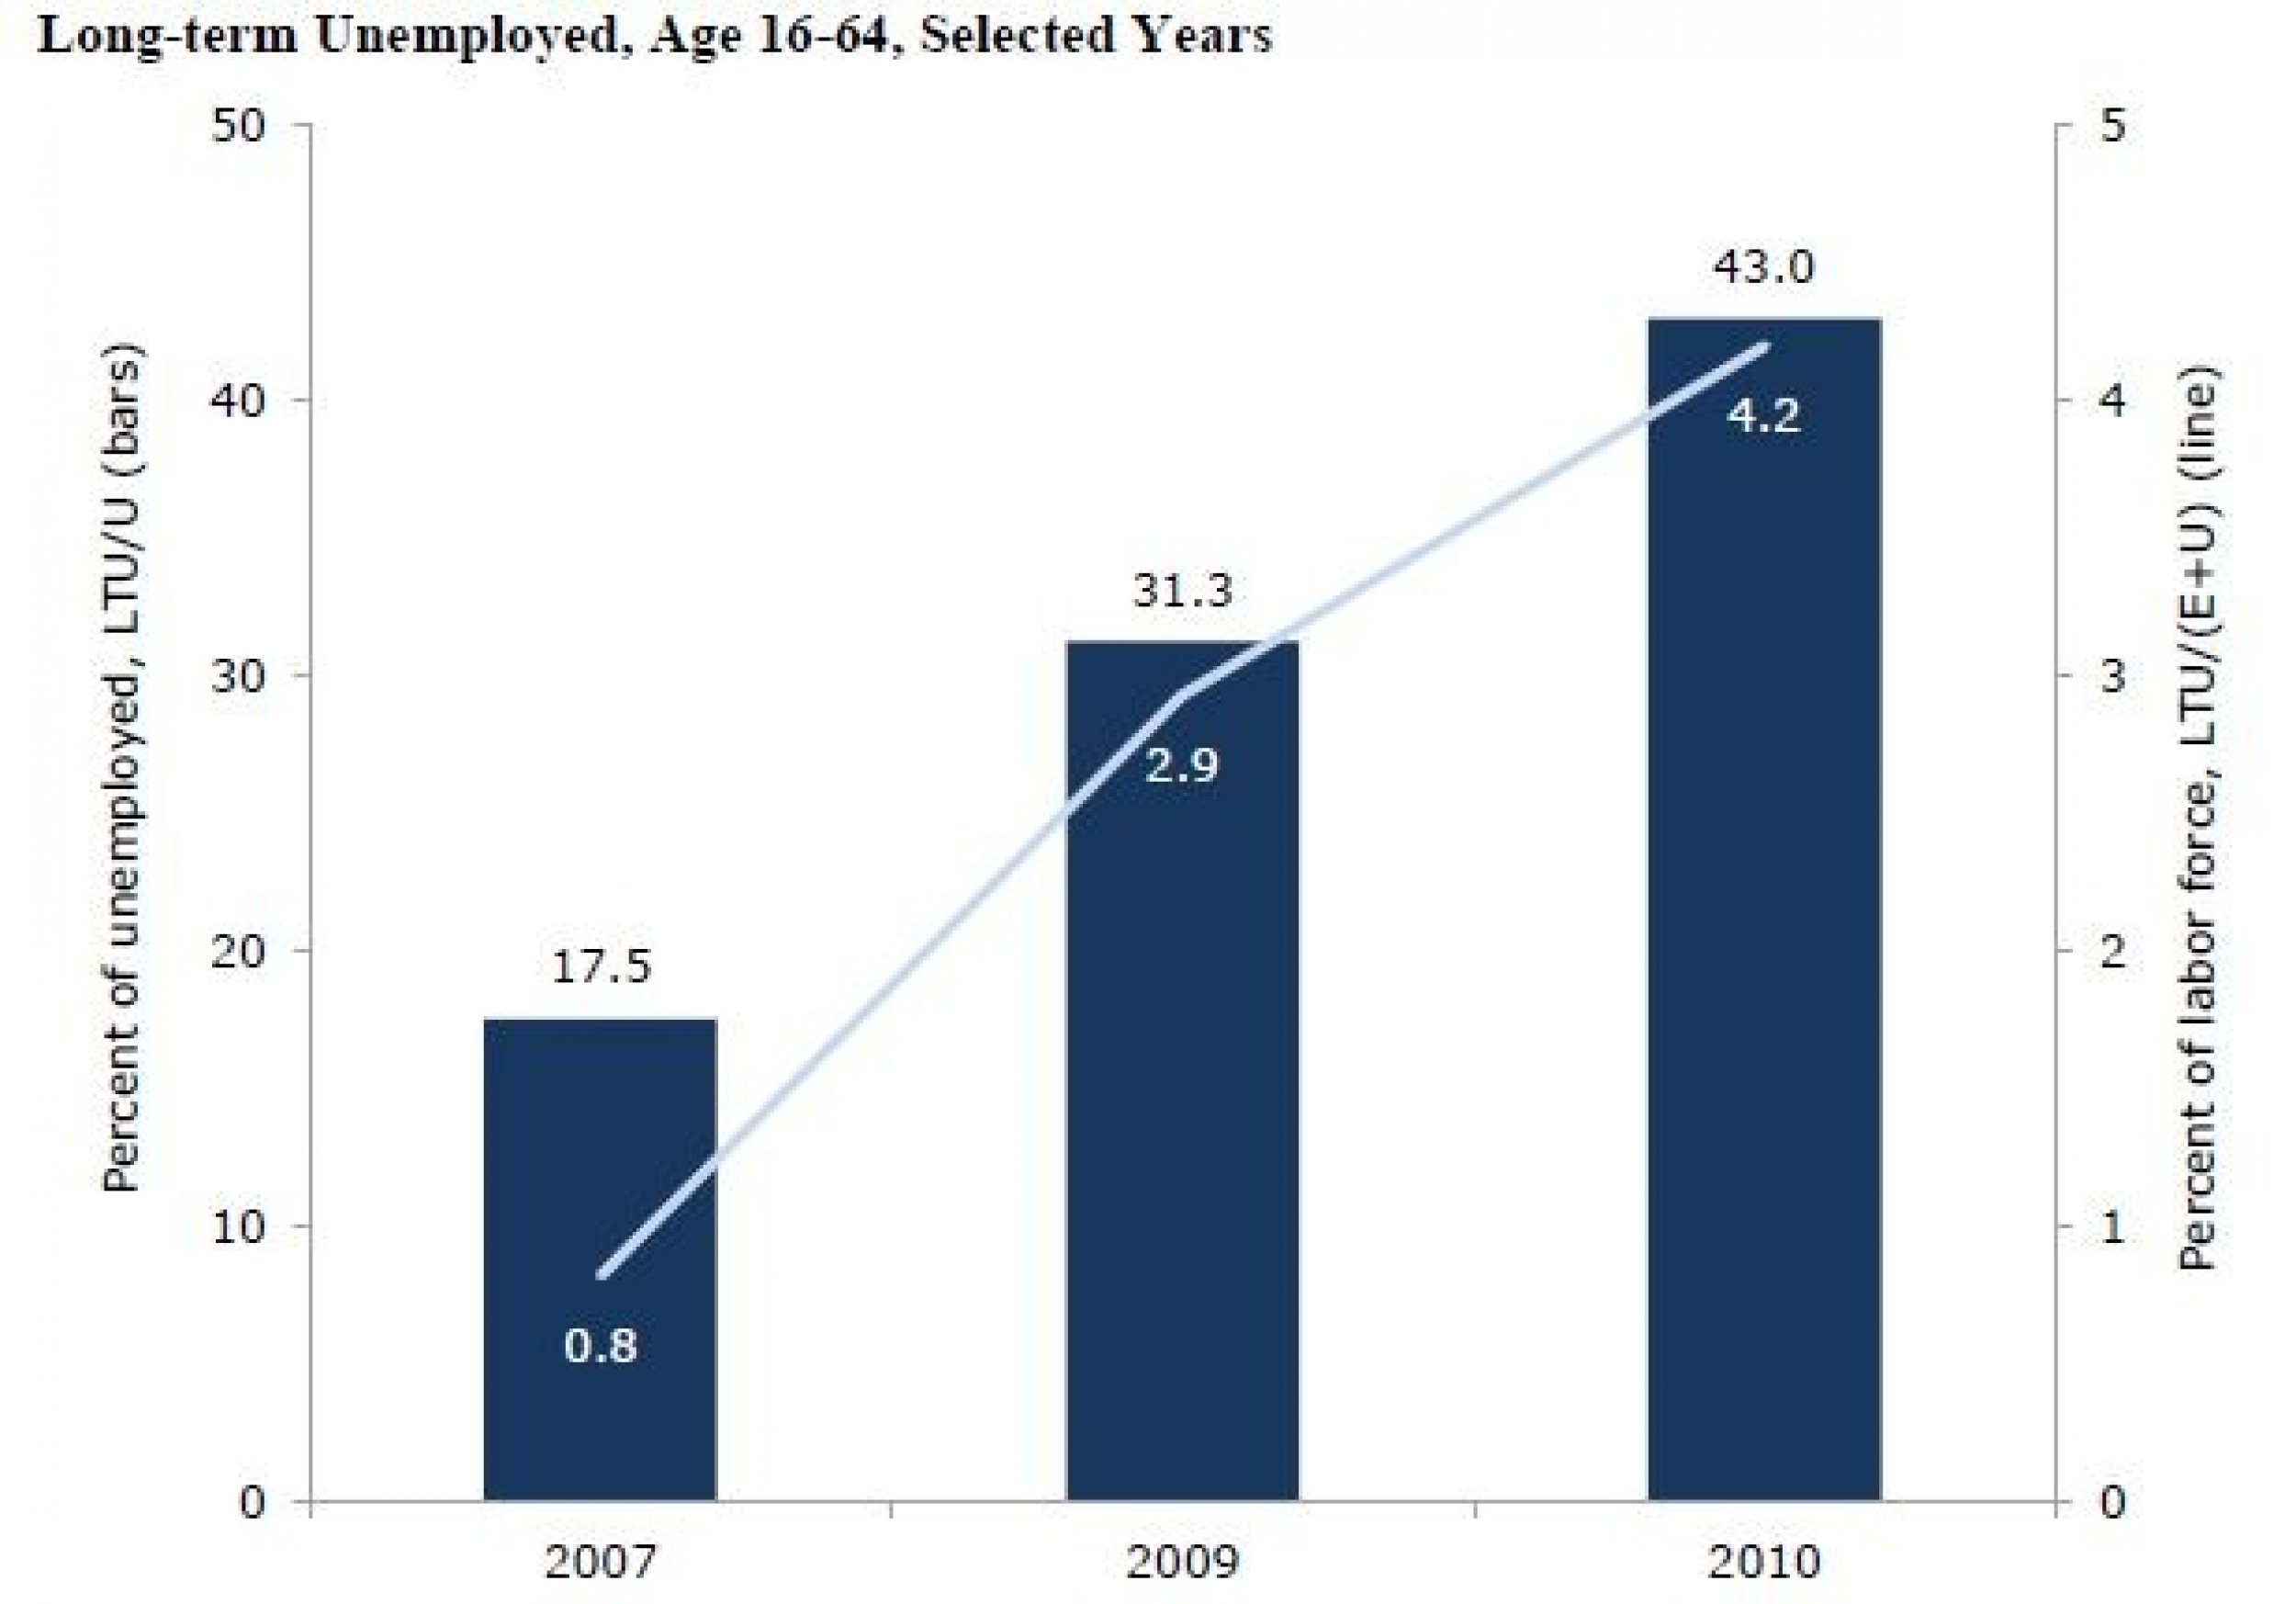 Long-term unemployed, age 16-64, selected years